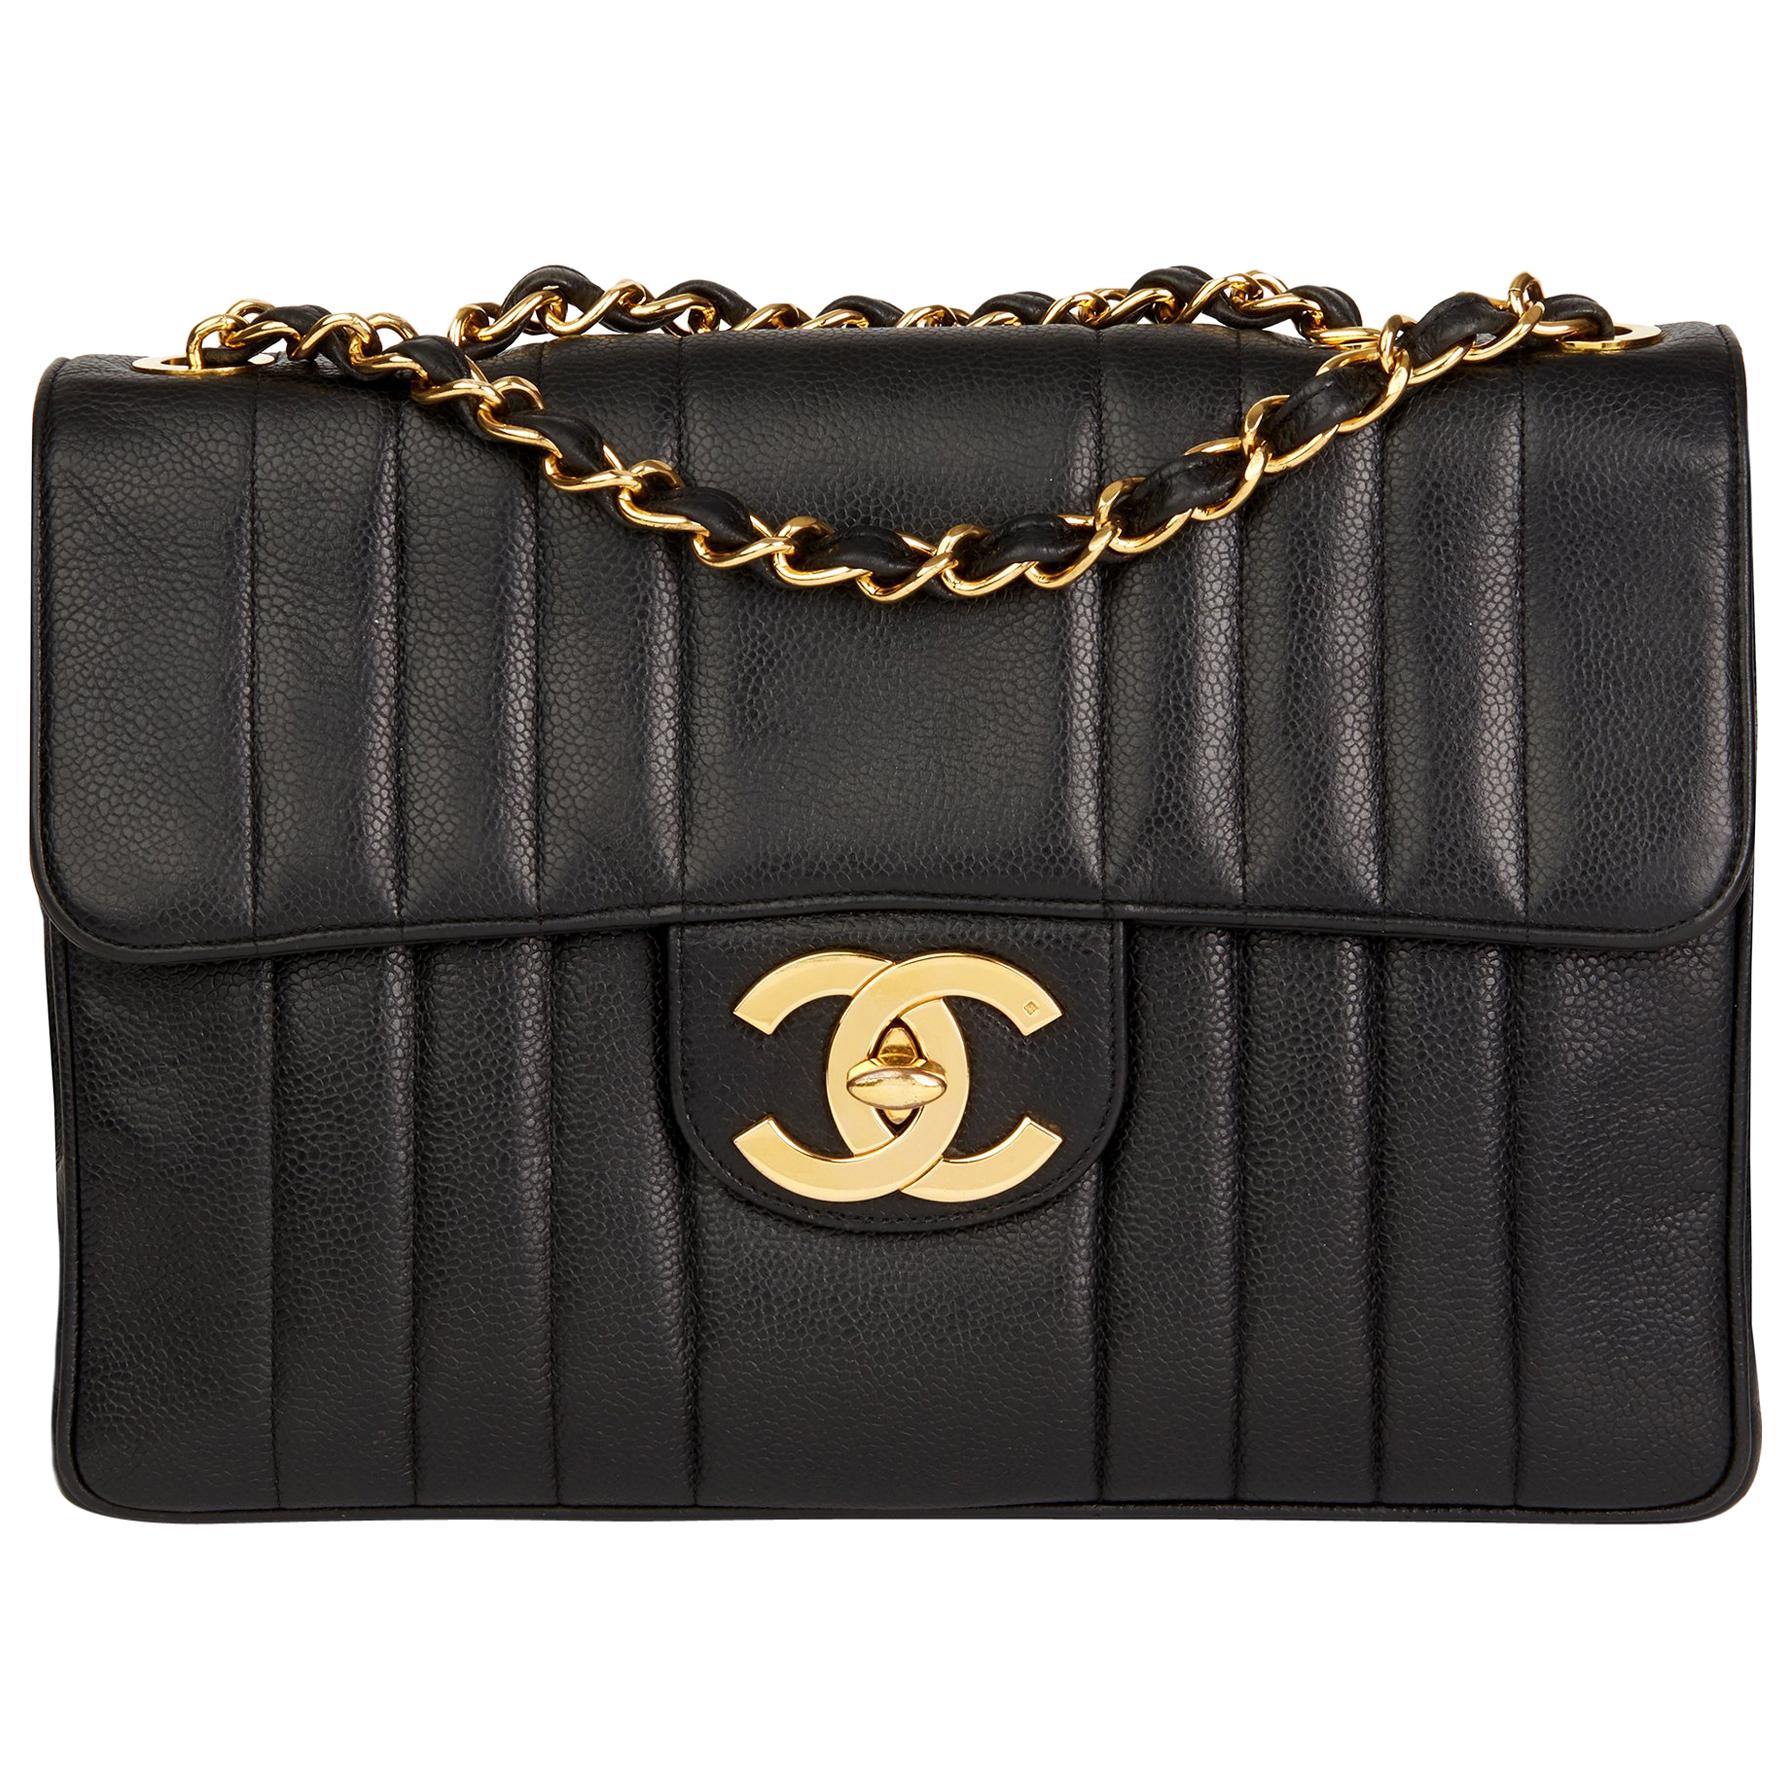 1995 Chanel Black Vertical Quilted Caviar Leather Vintage Jumbo XL Flap ...